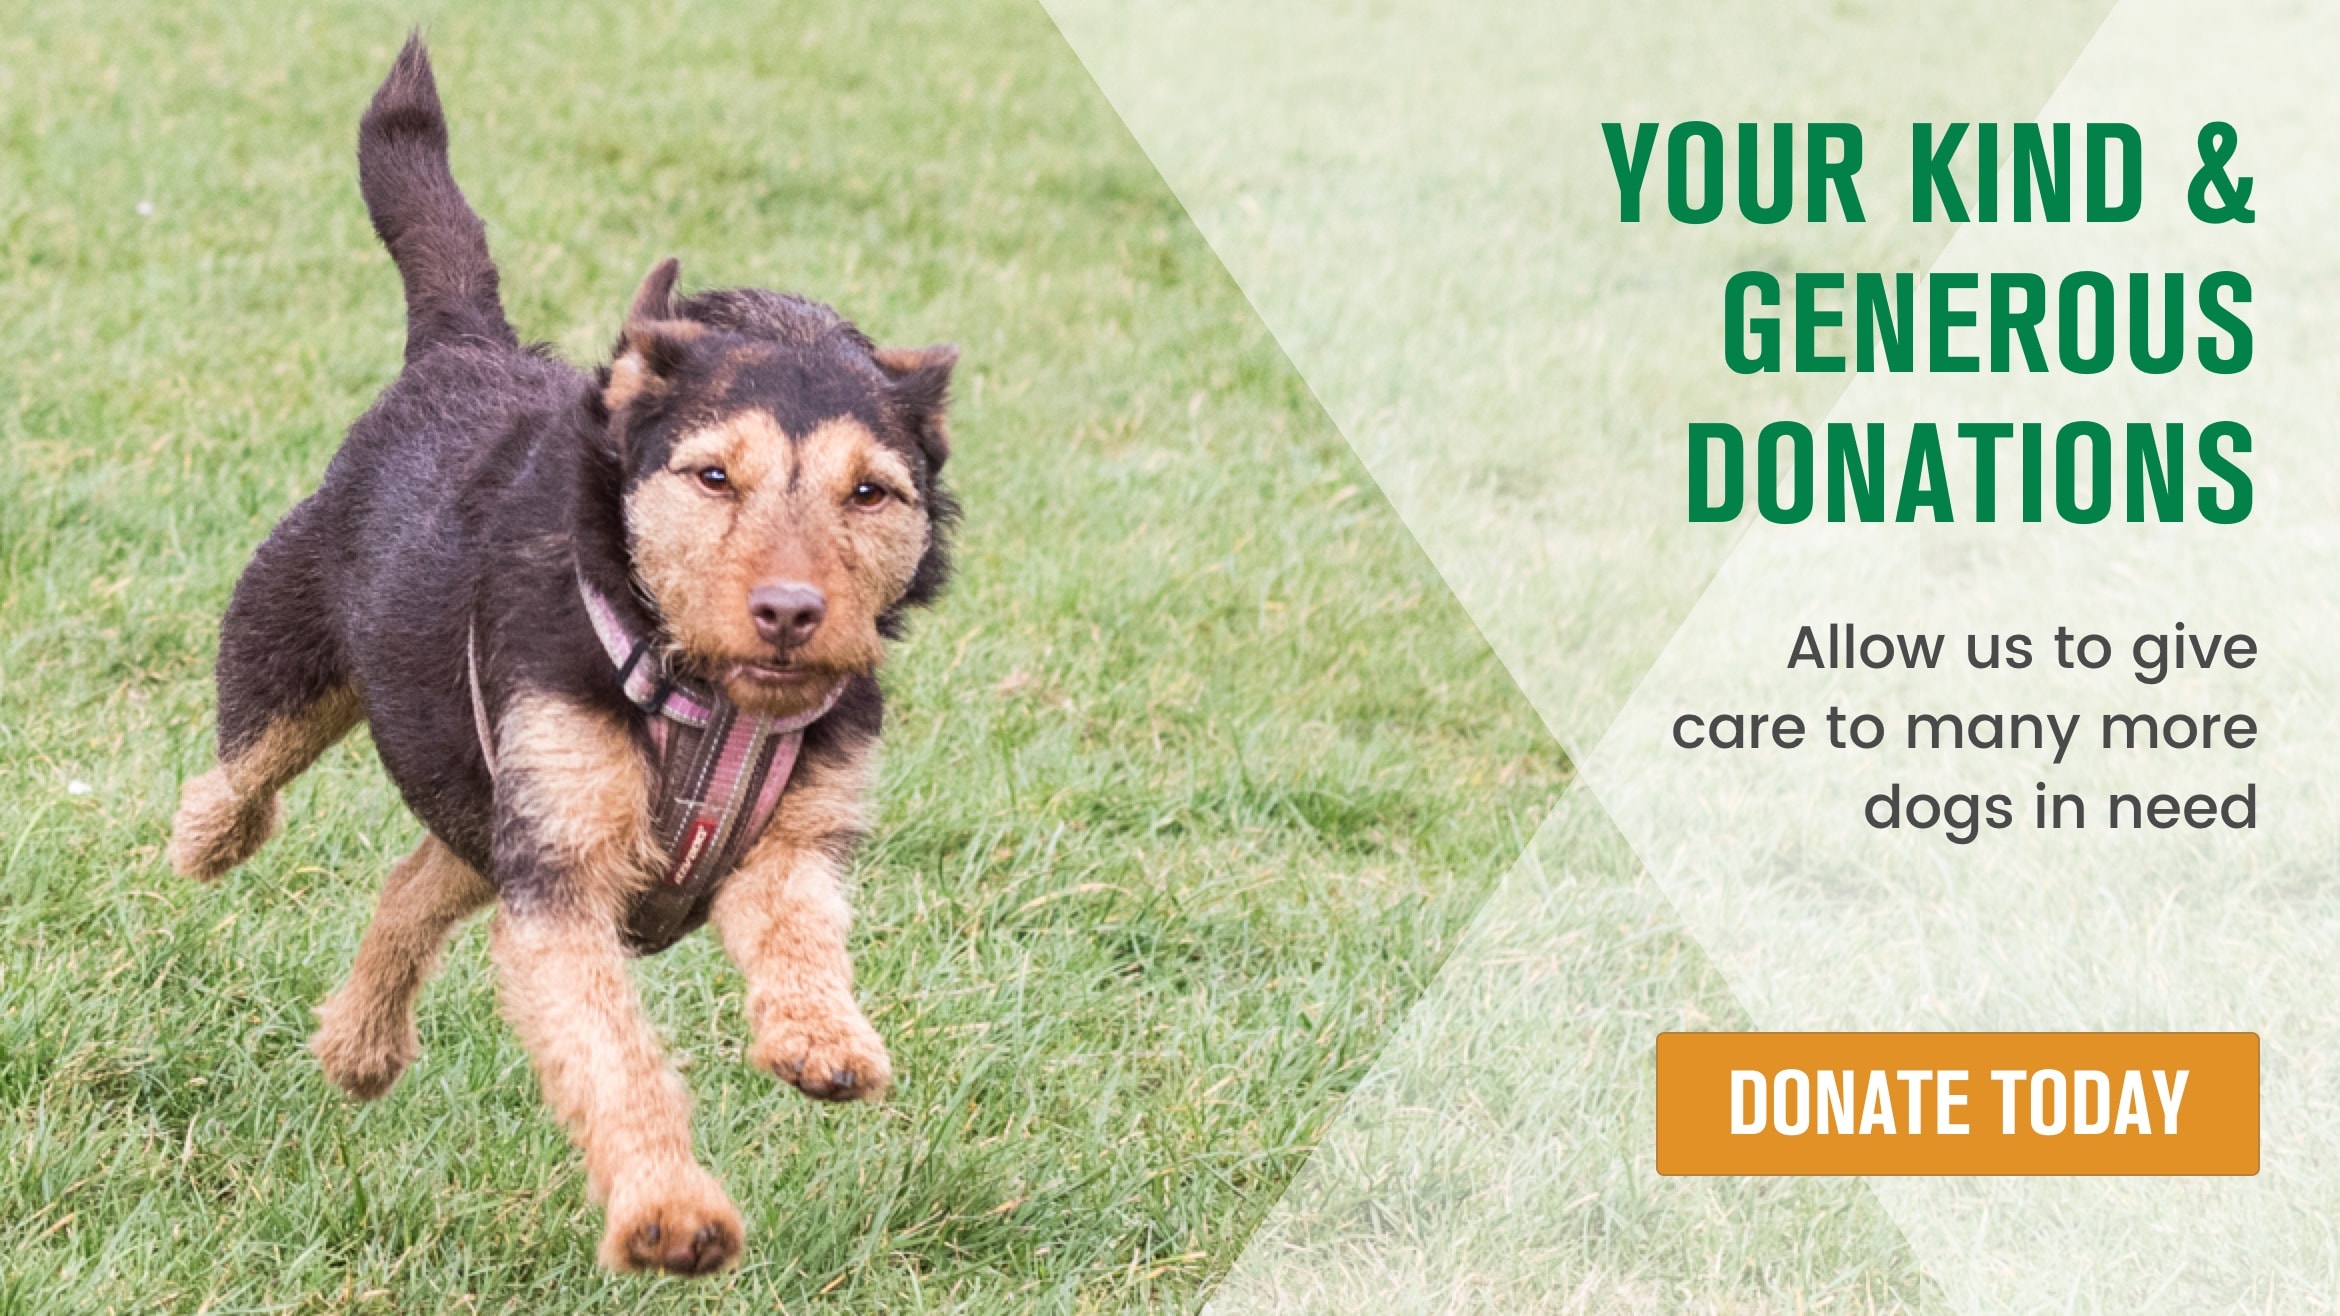 With your donations we can help more dogs in need